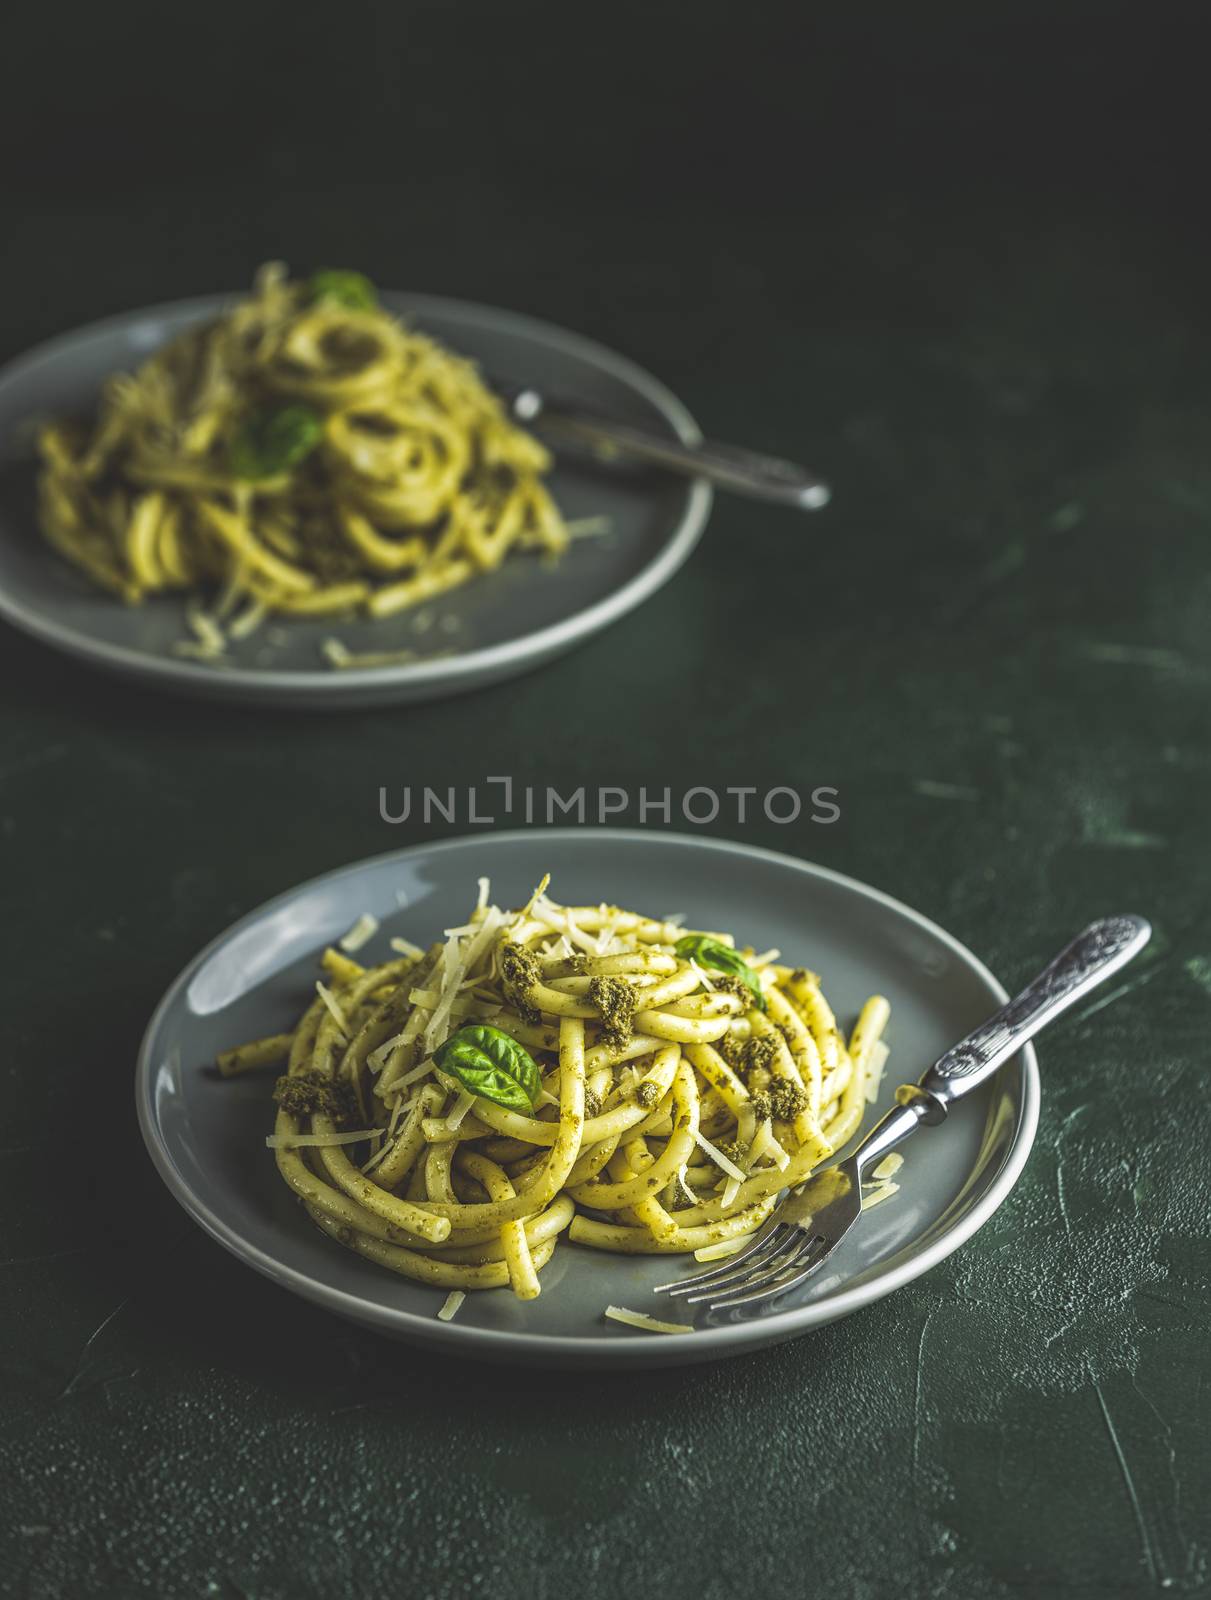 Spaghetti pasta bucatini with pesto sauce and parmesan. Italian traditional perciatelli pasta by genovese pesto sauce in two gray dishes	